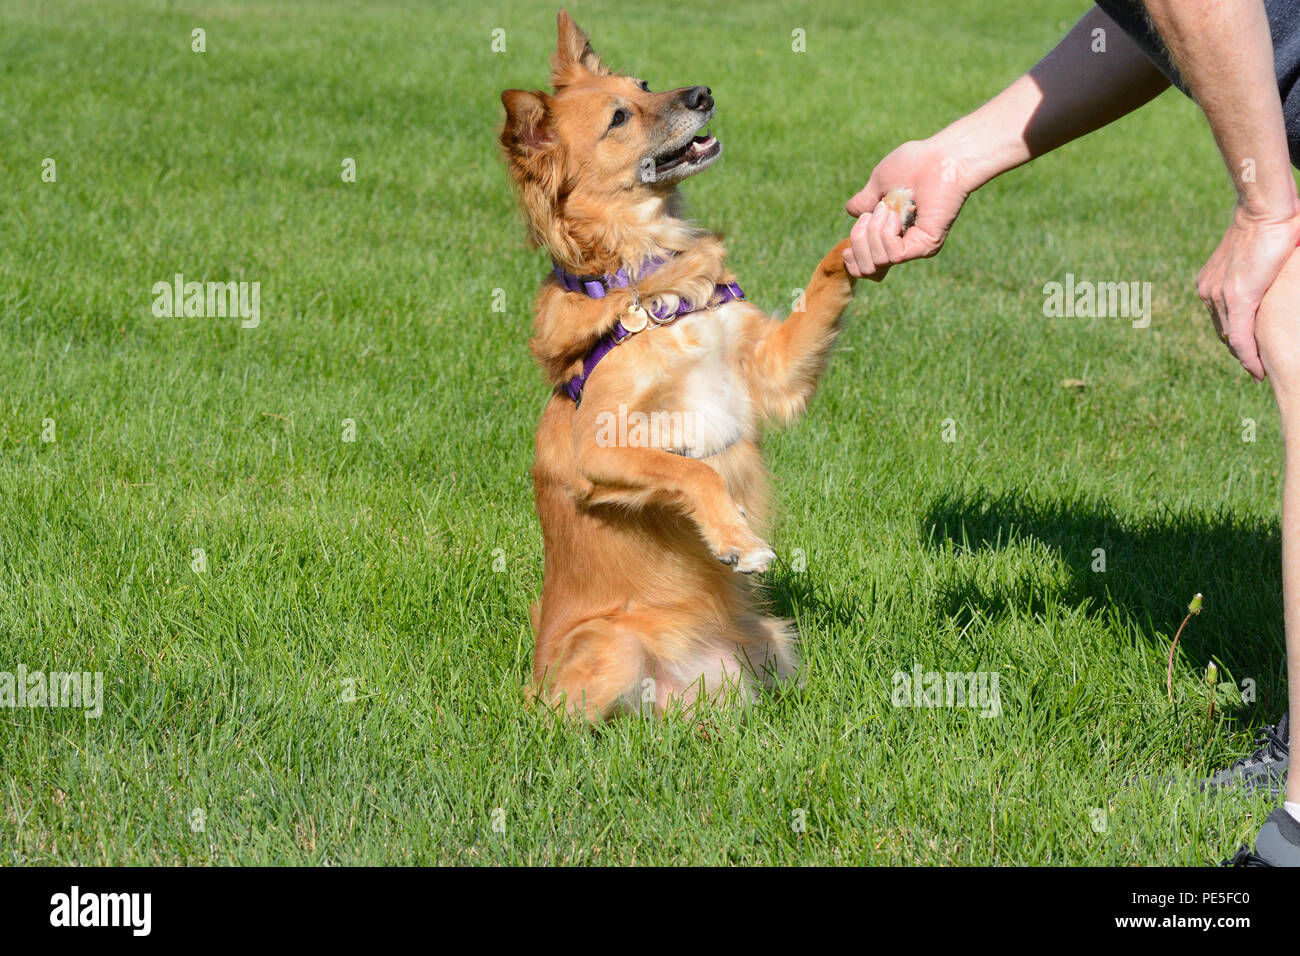 Mixed Breed Brown Dog Shaking Hands With Man While Looking With Love Into His Eyes Stock Photo Alamy